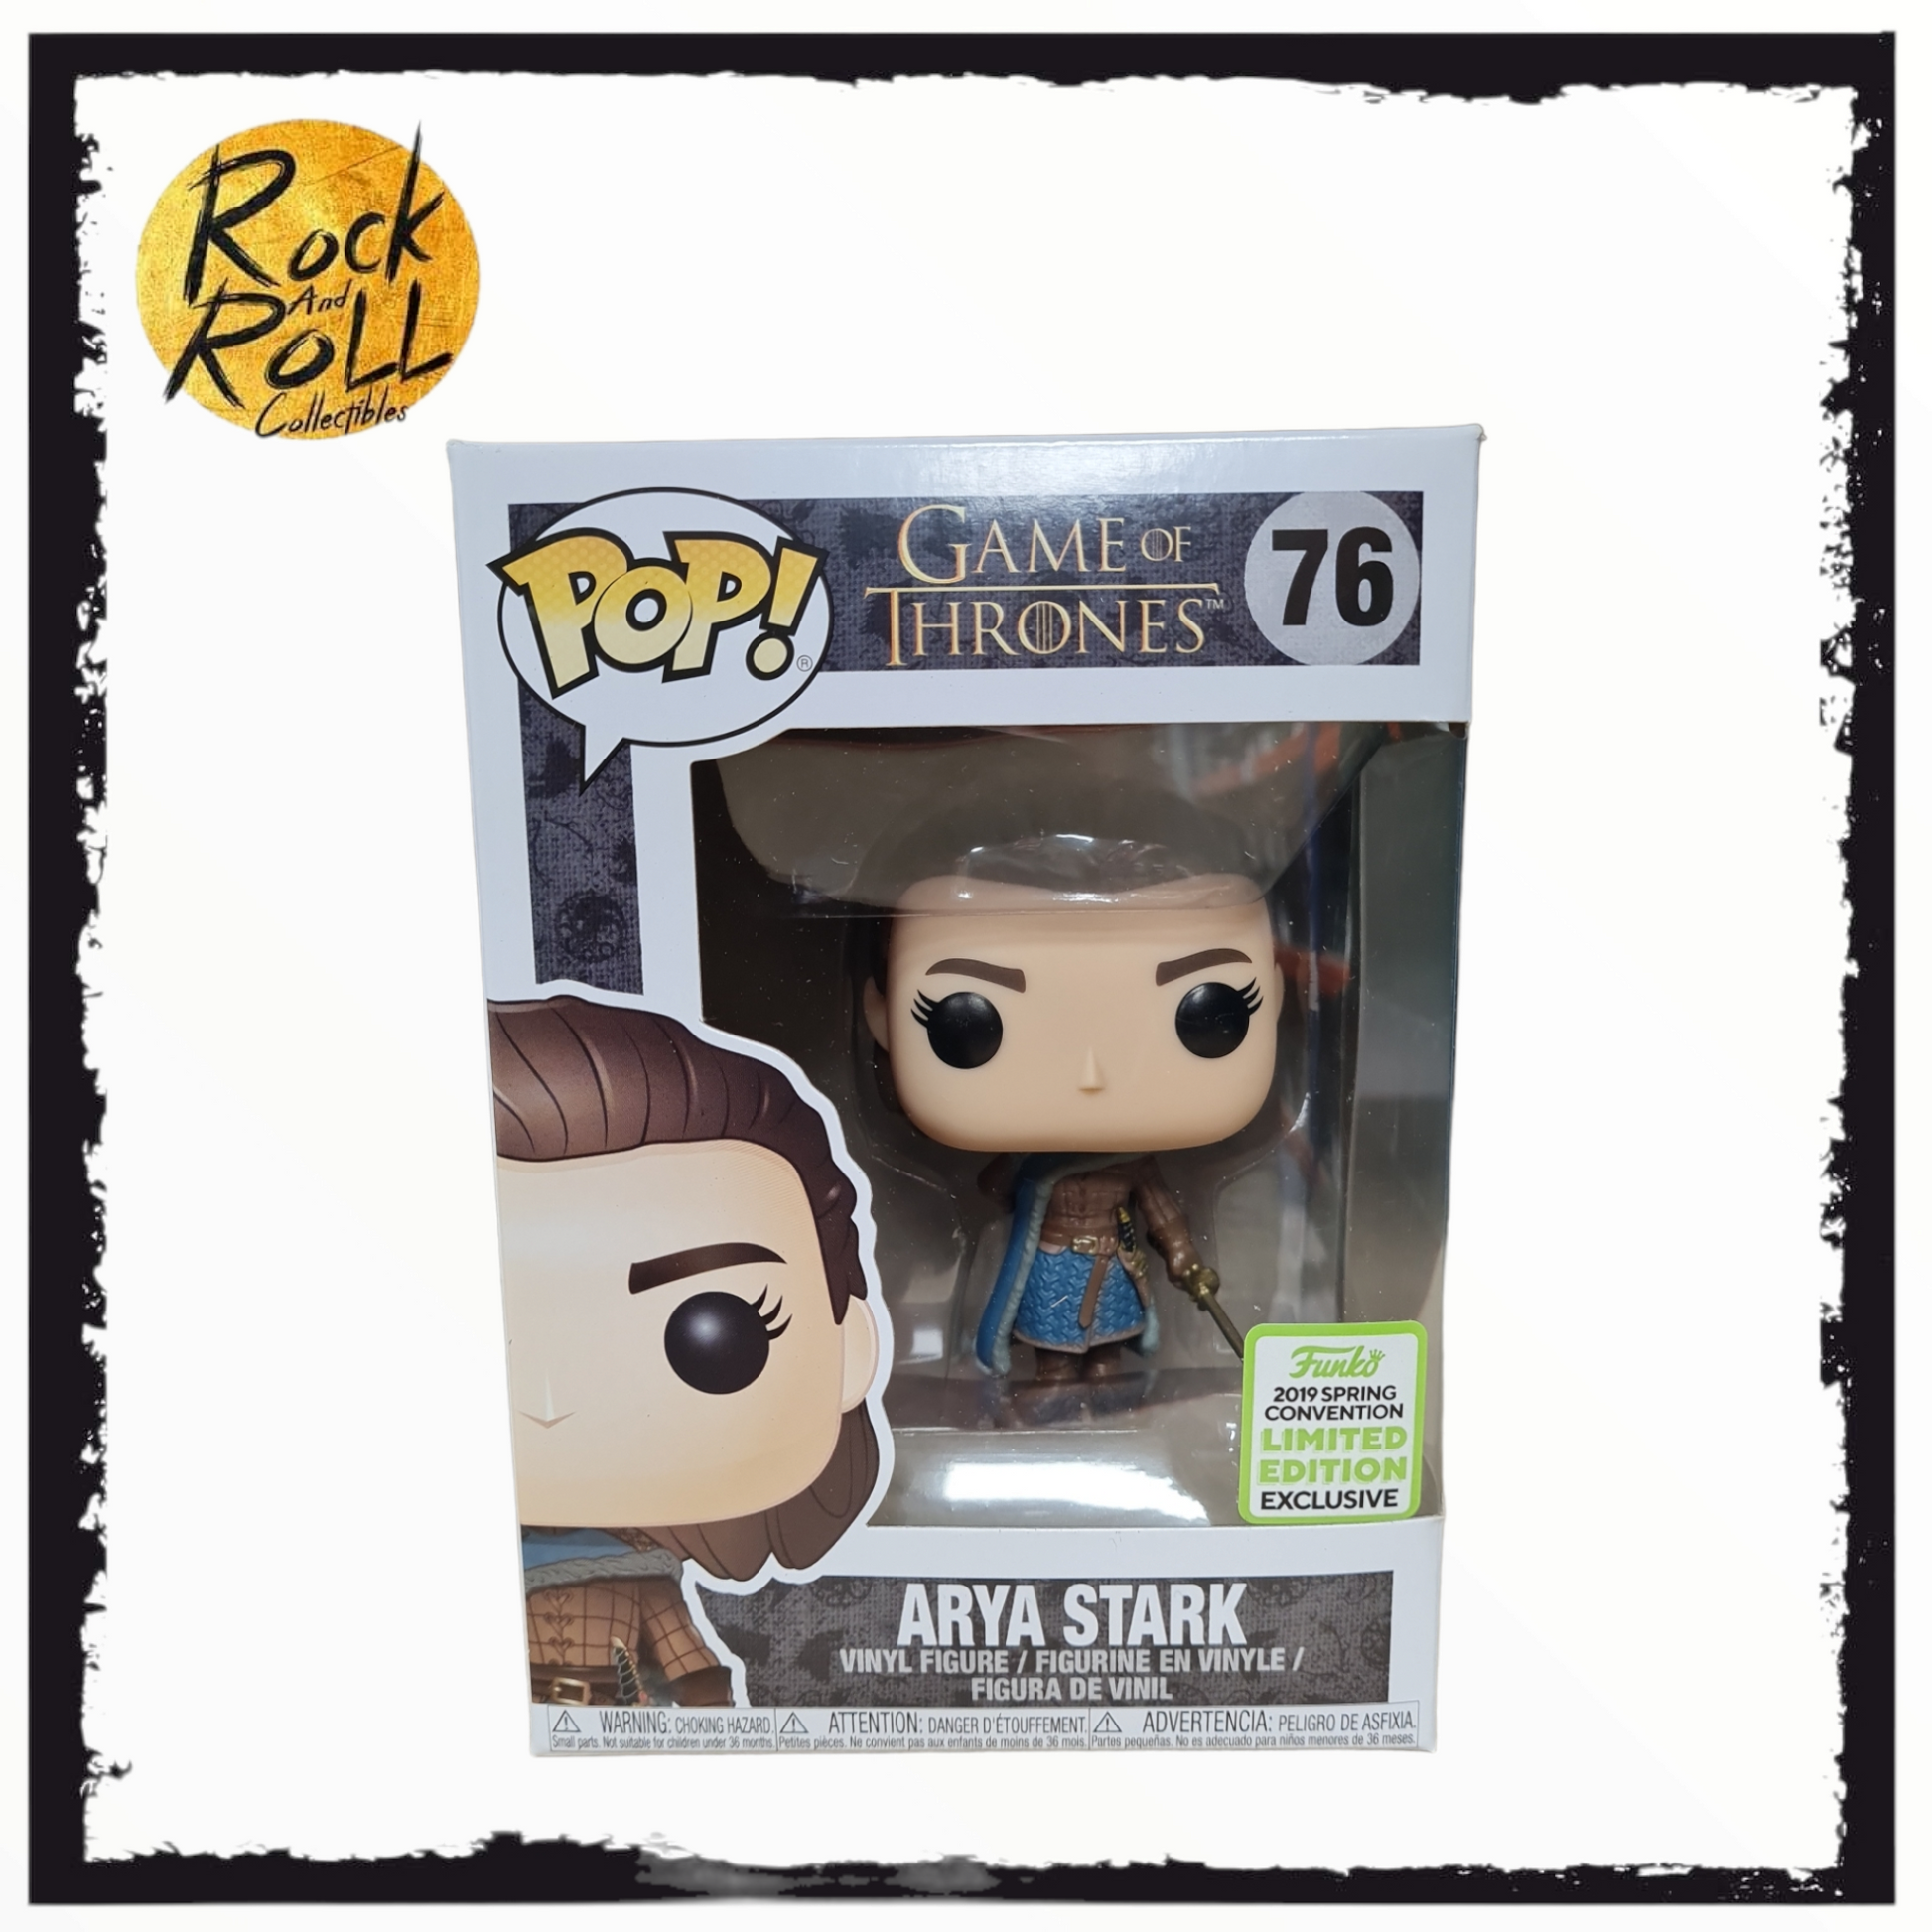 lige Guggenheim Museum Takt Game of Thrones - Arya Stark Funko Pop! #76 2019 Spring Convention Sha –  rock and roll collectibles